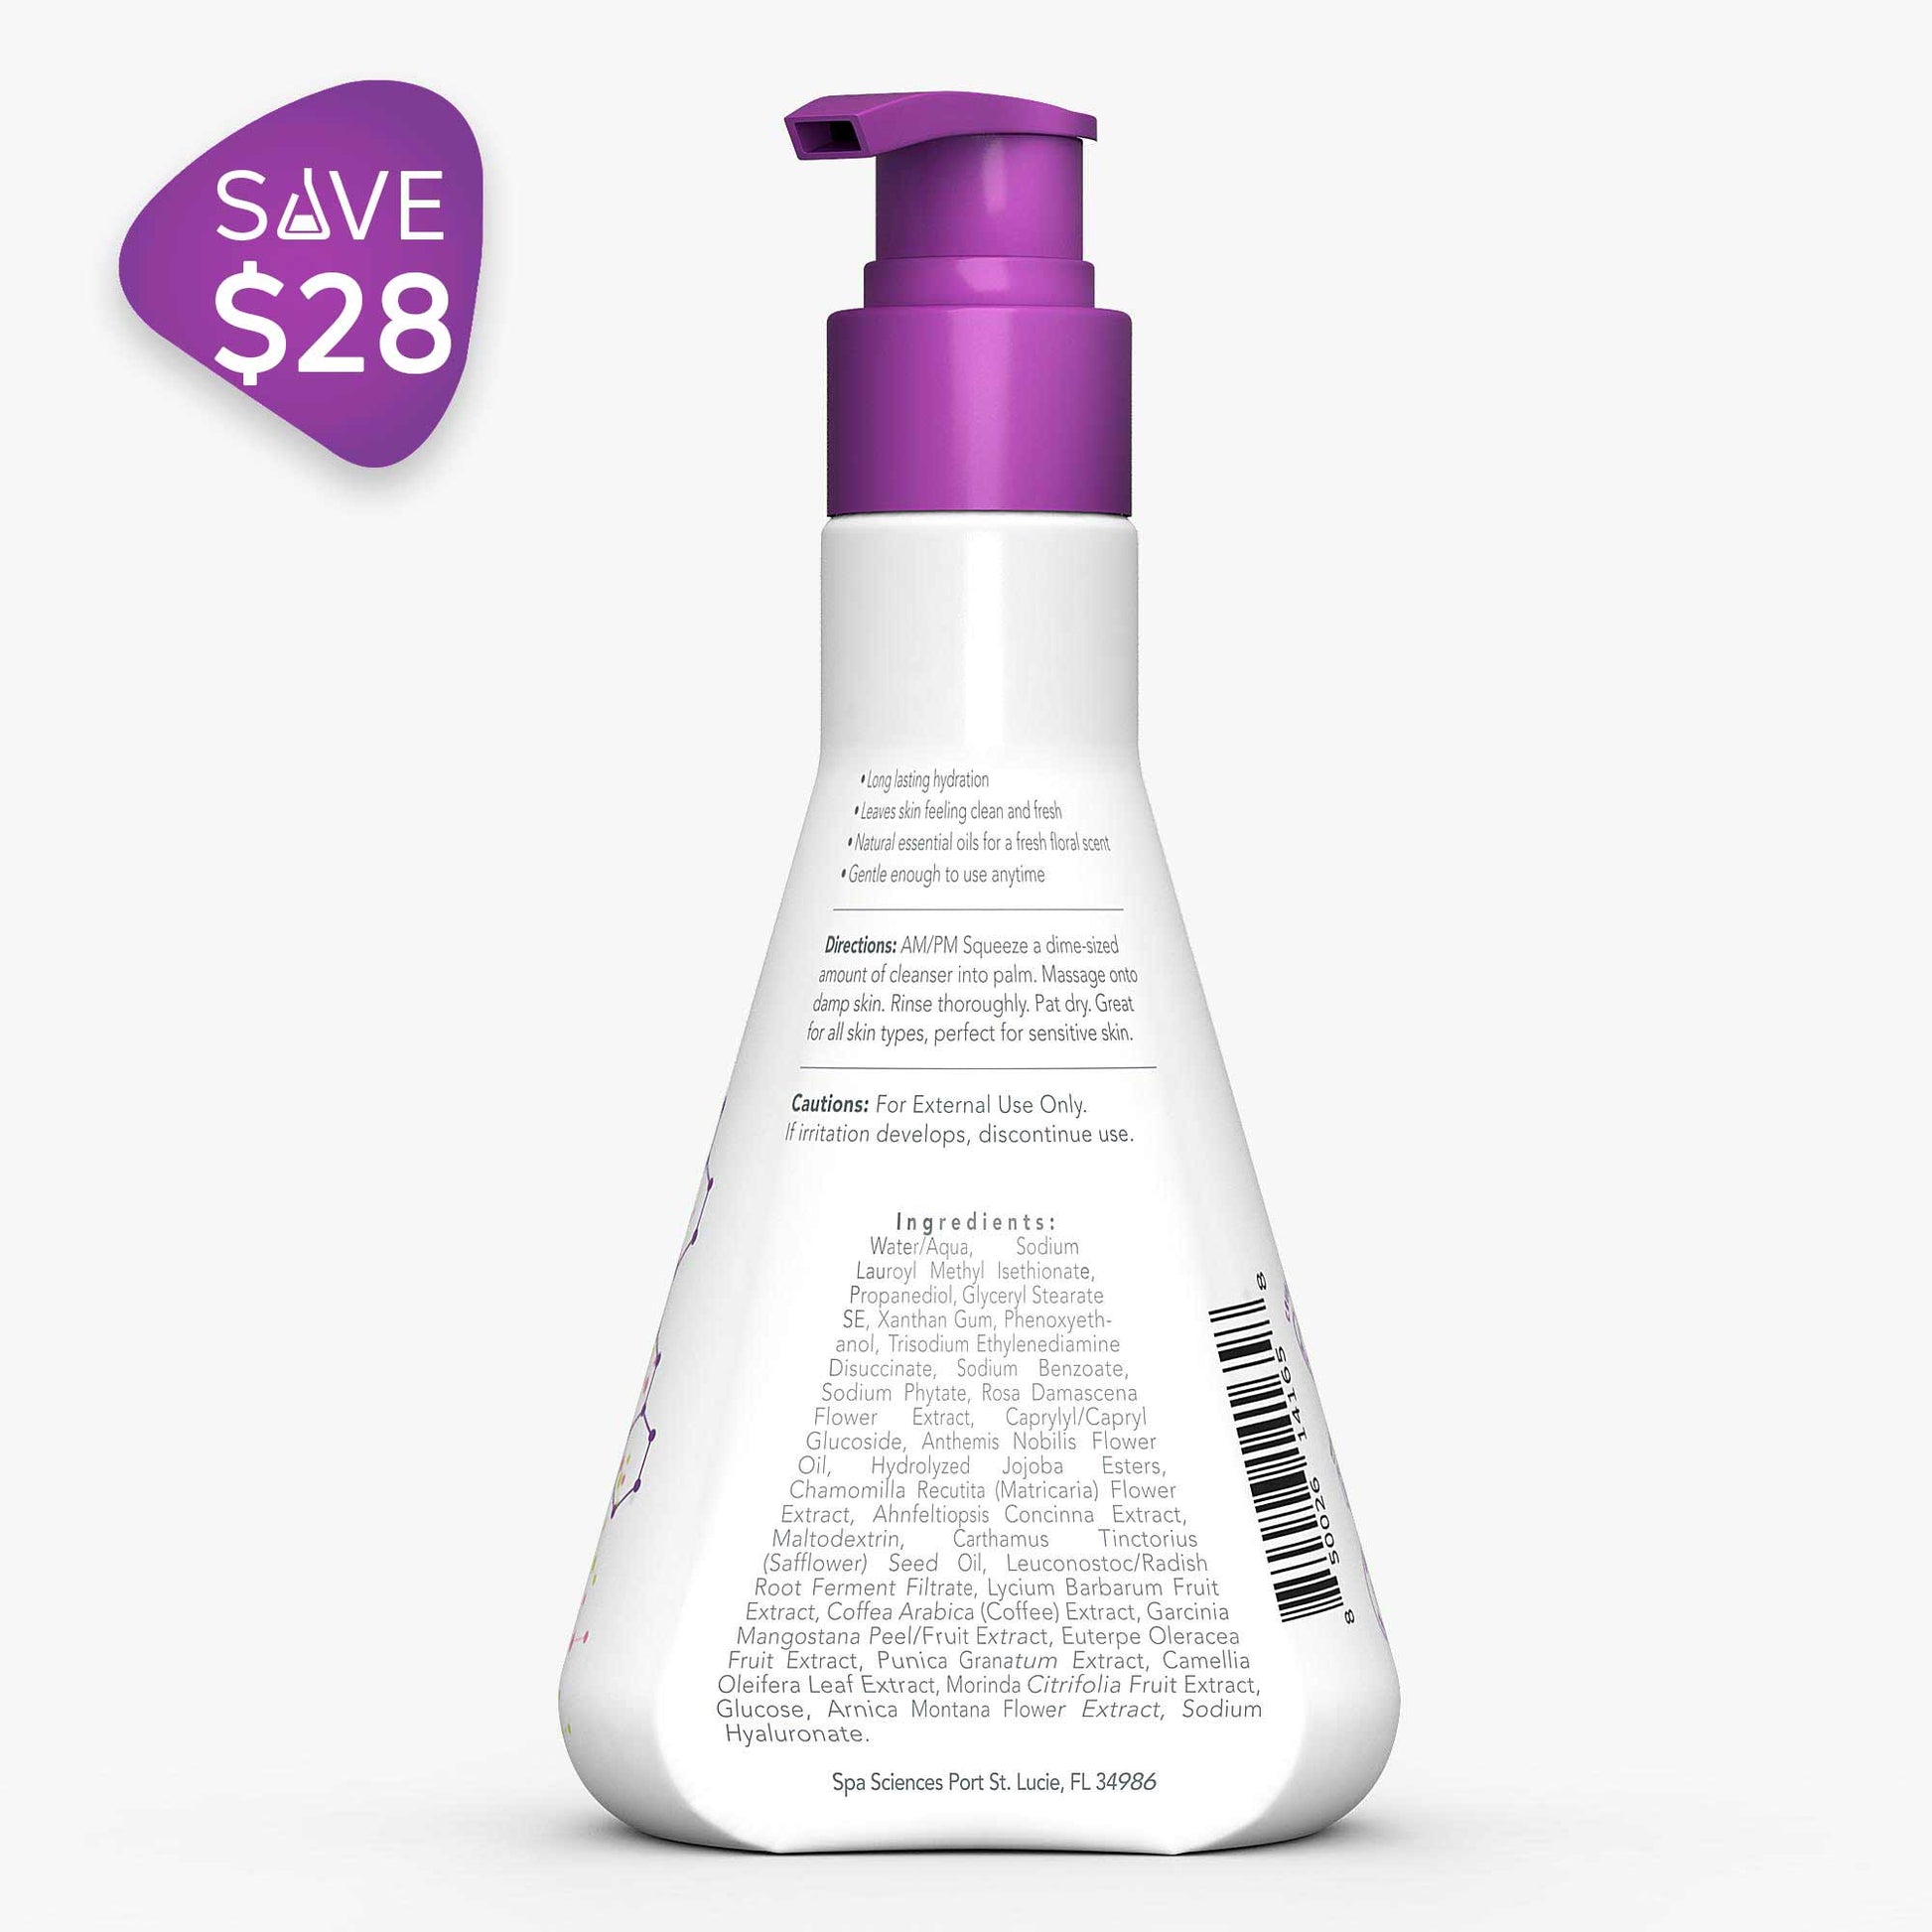 A high-quality bottle of Spa Sciences Pore Perfection Bundle with a purple label on it.